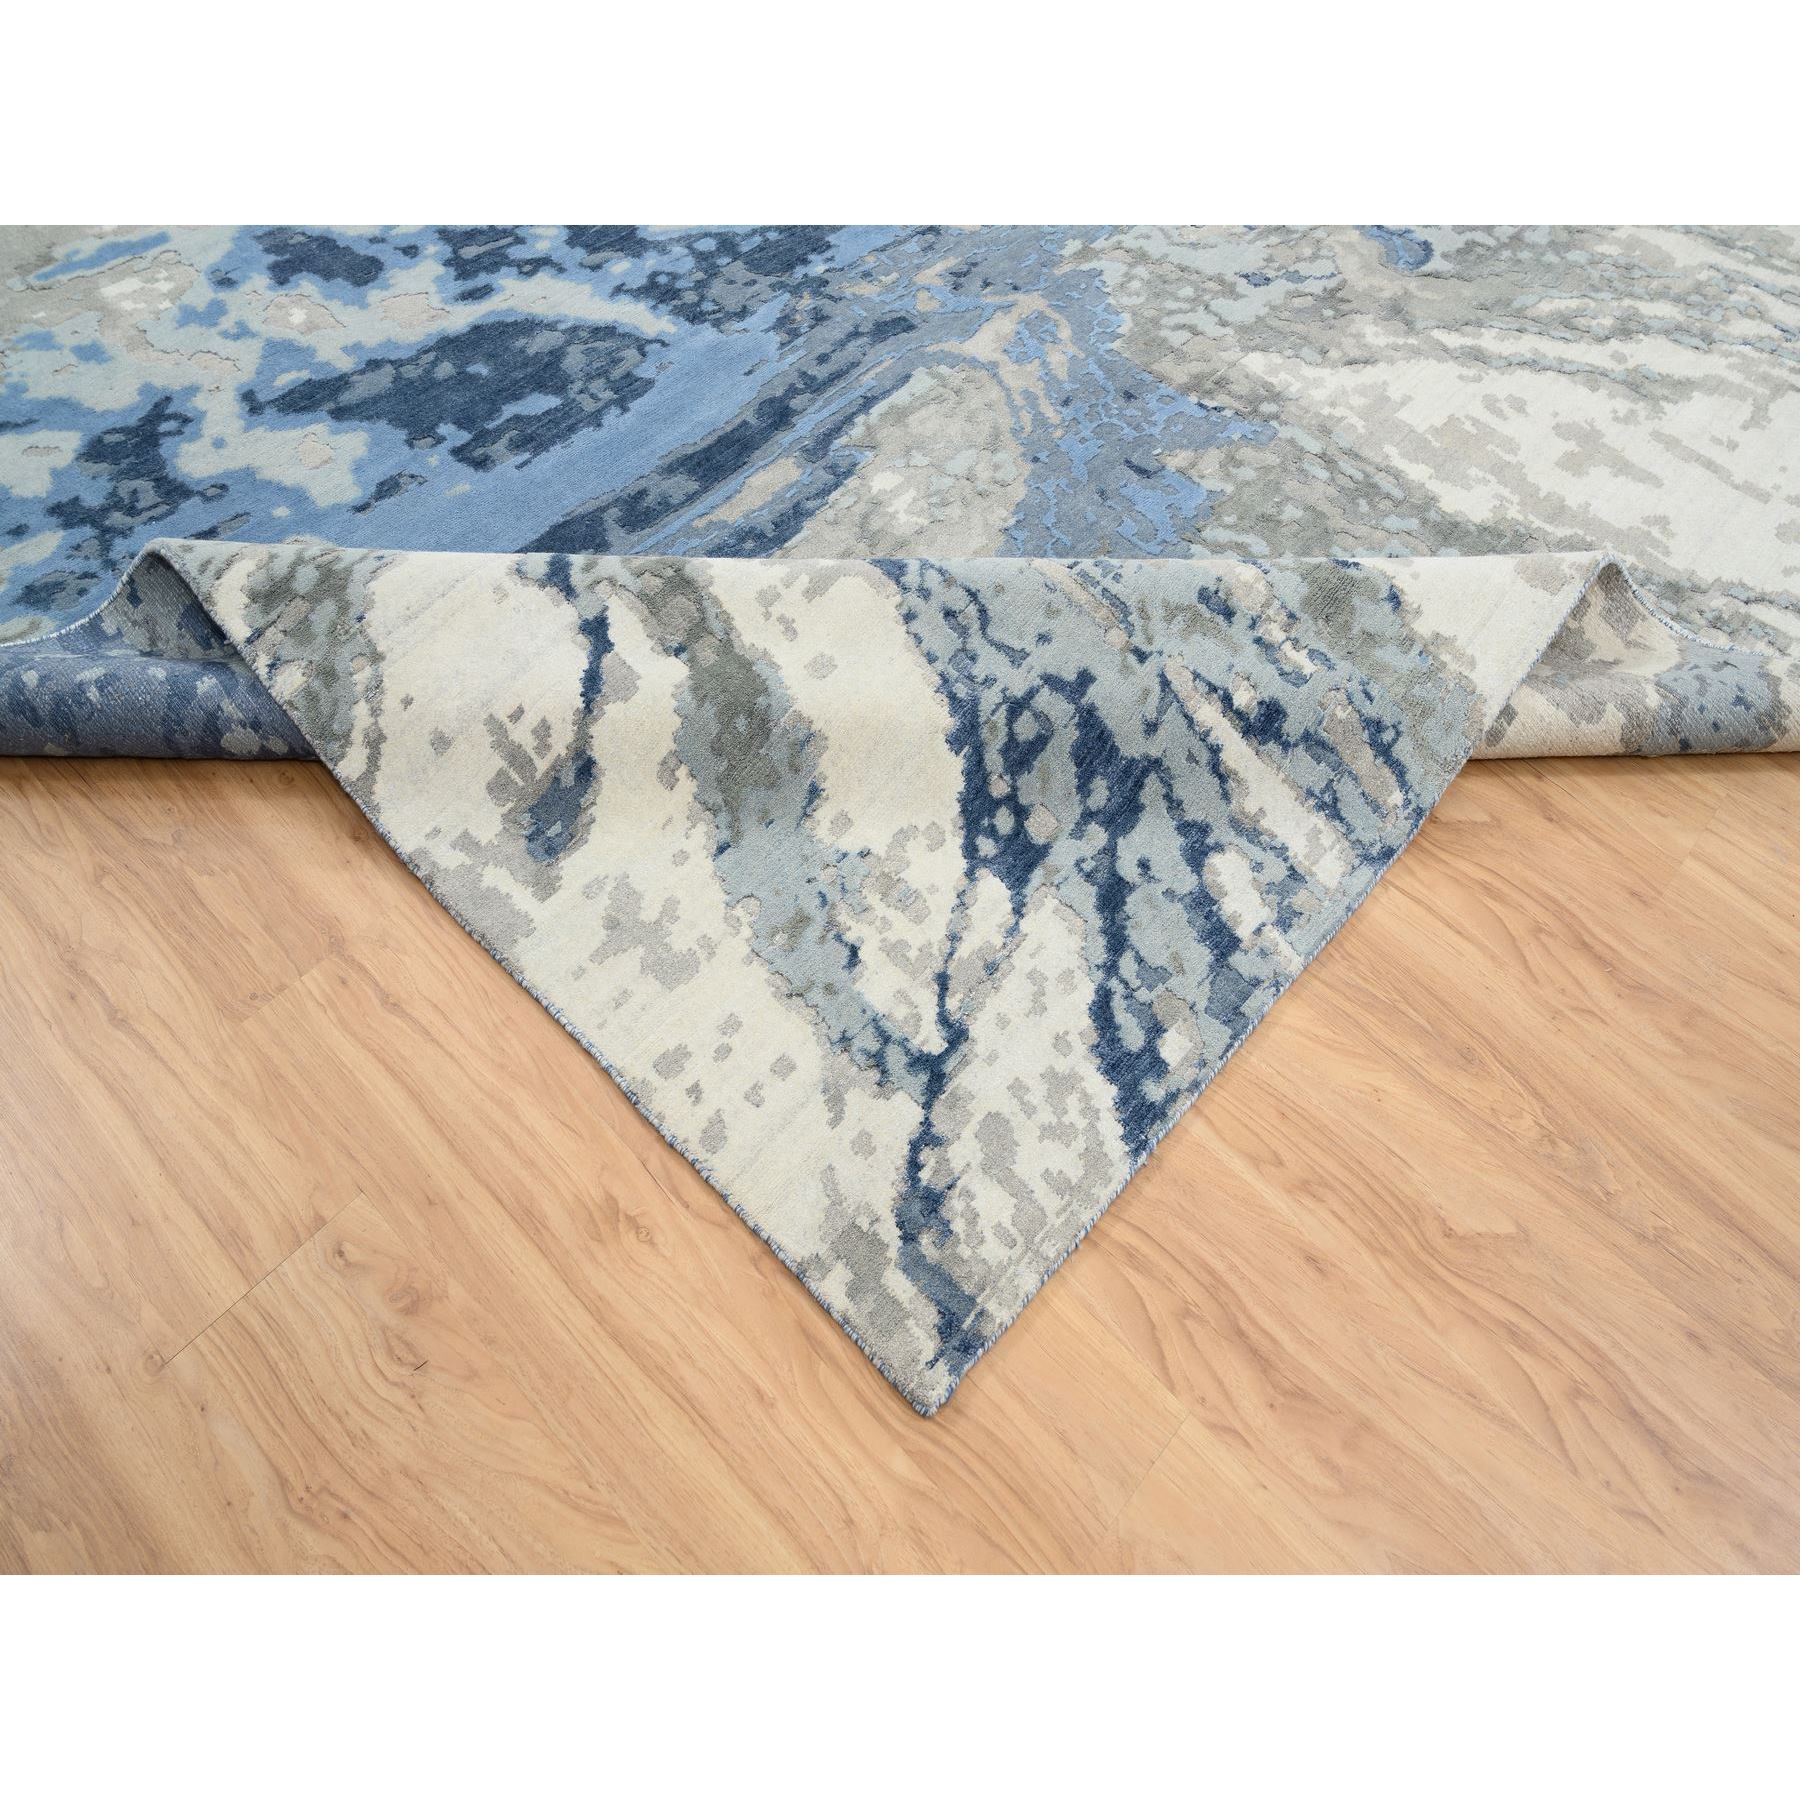 10'x13'7" Beige and Blue, Abstract Design Wool and Silk, Hi-Low Pile Hand Woven, Oriental Rug 